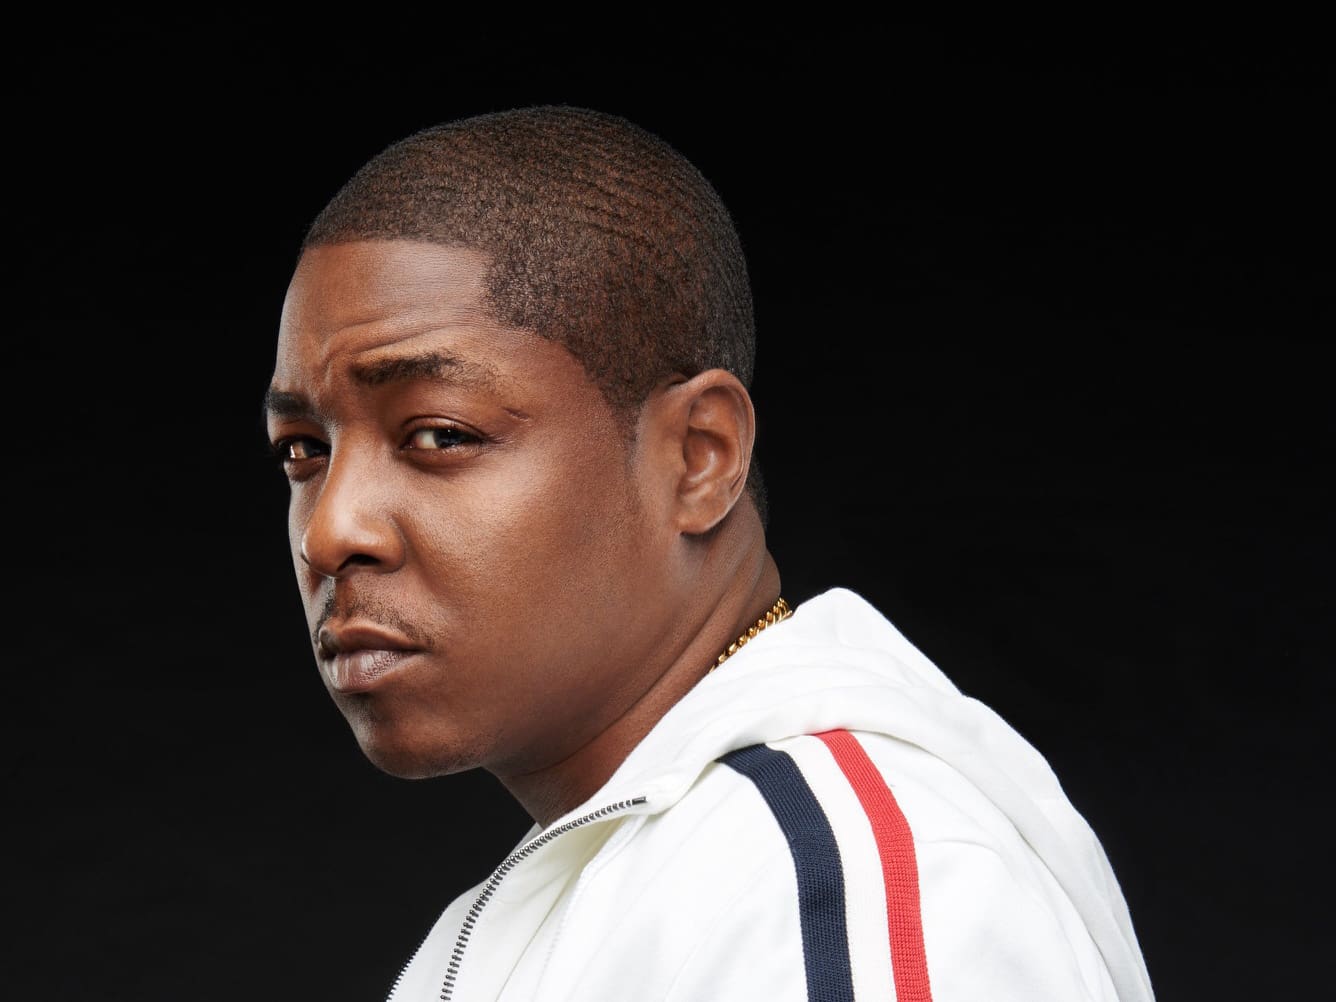 The 47-year old son of father (?) and mother(?) Jadakiss in 2022 photo. Jadakiss earned a  million dollar salary - leaving the net worth at 6 million in 2022